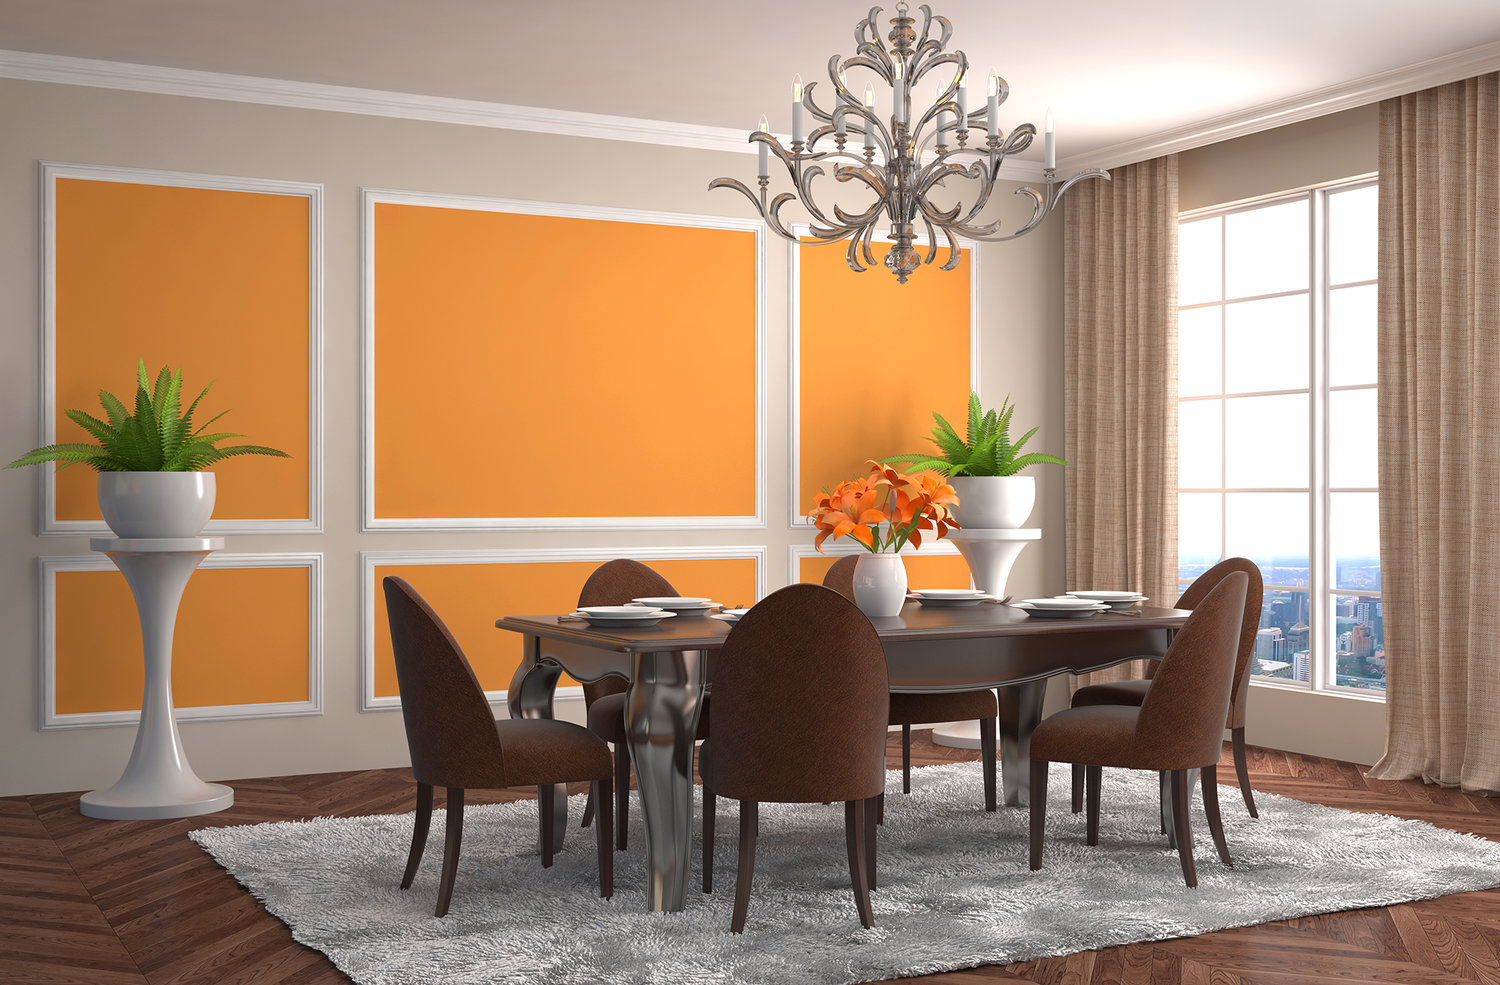 Don’t forget your dining room: budget-friendly renovation ideas